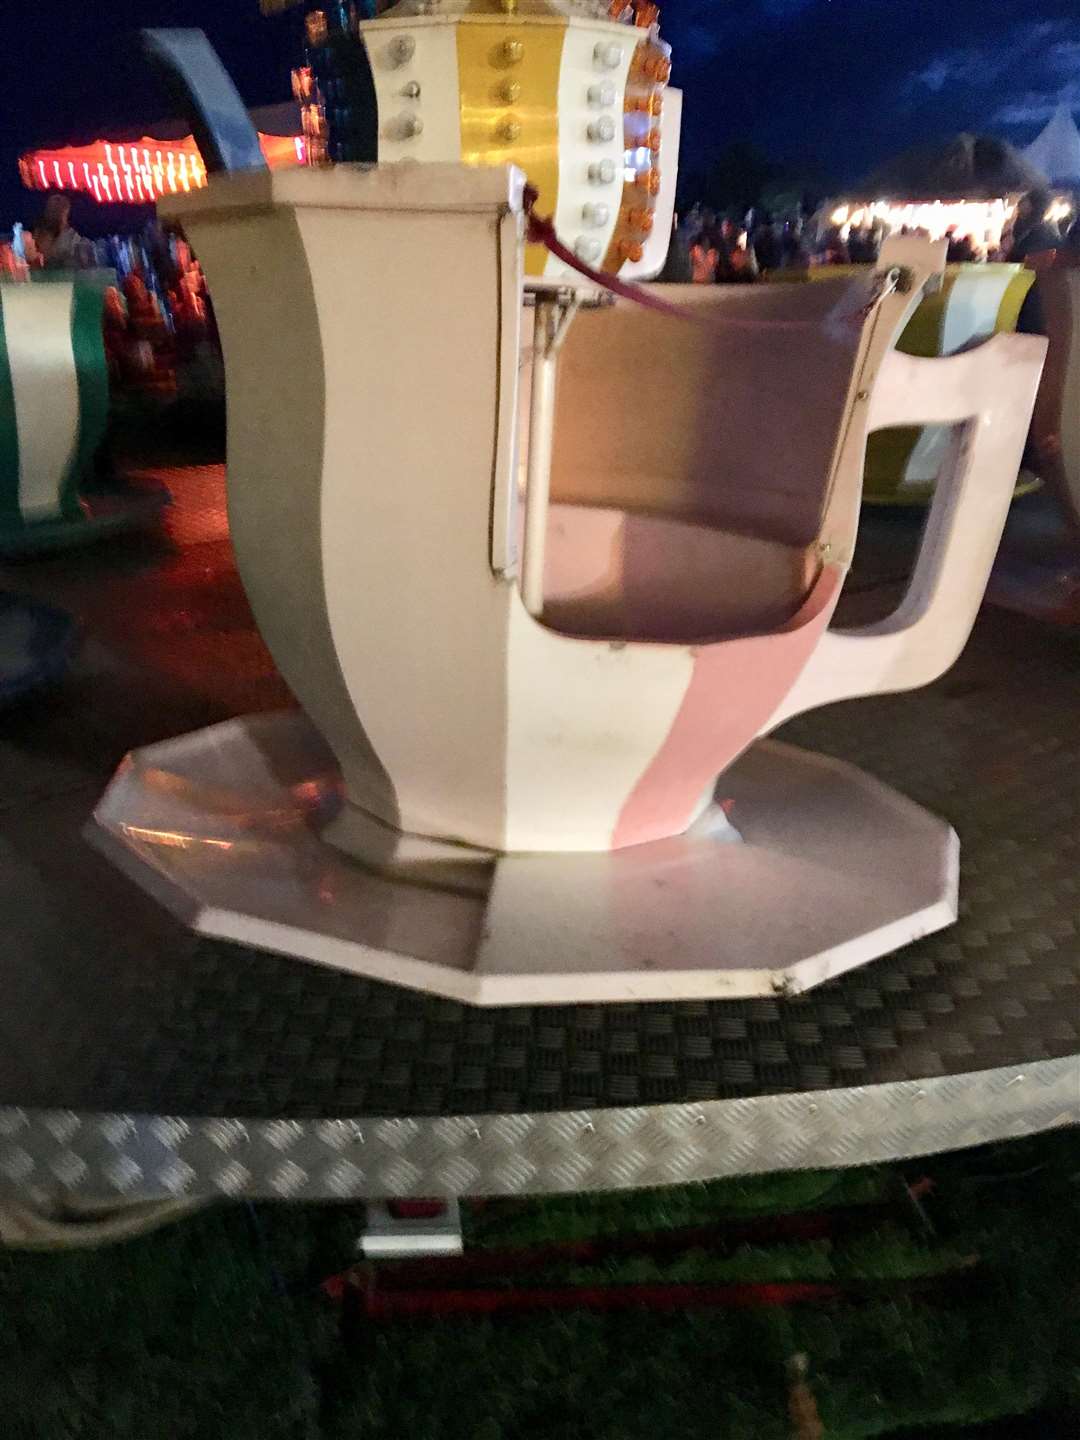 The teacup that came loose from the ride (5189491)